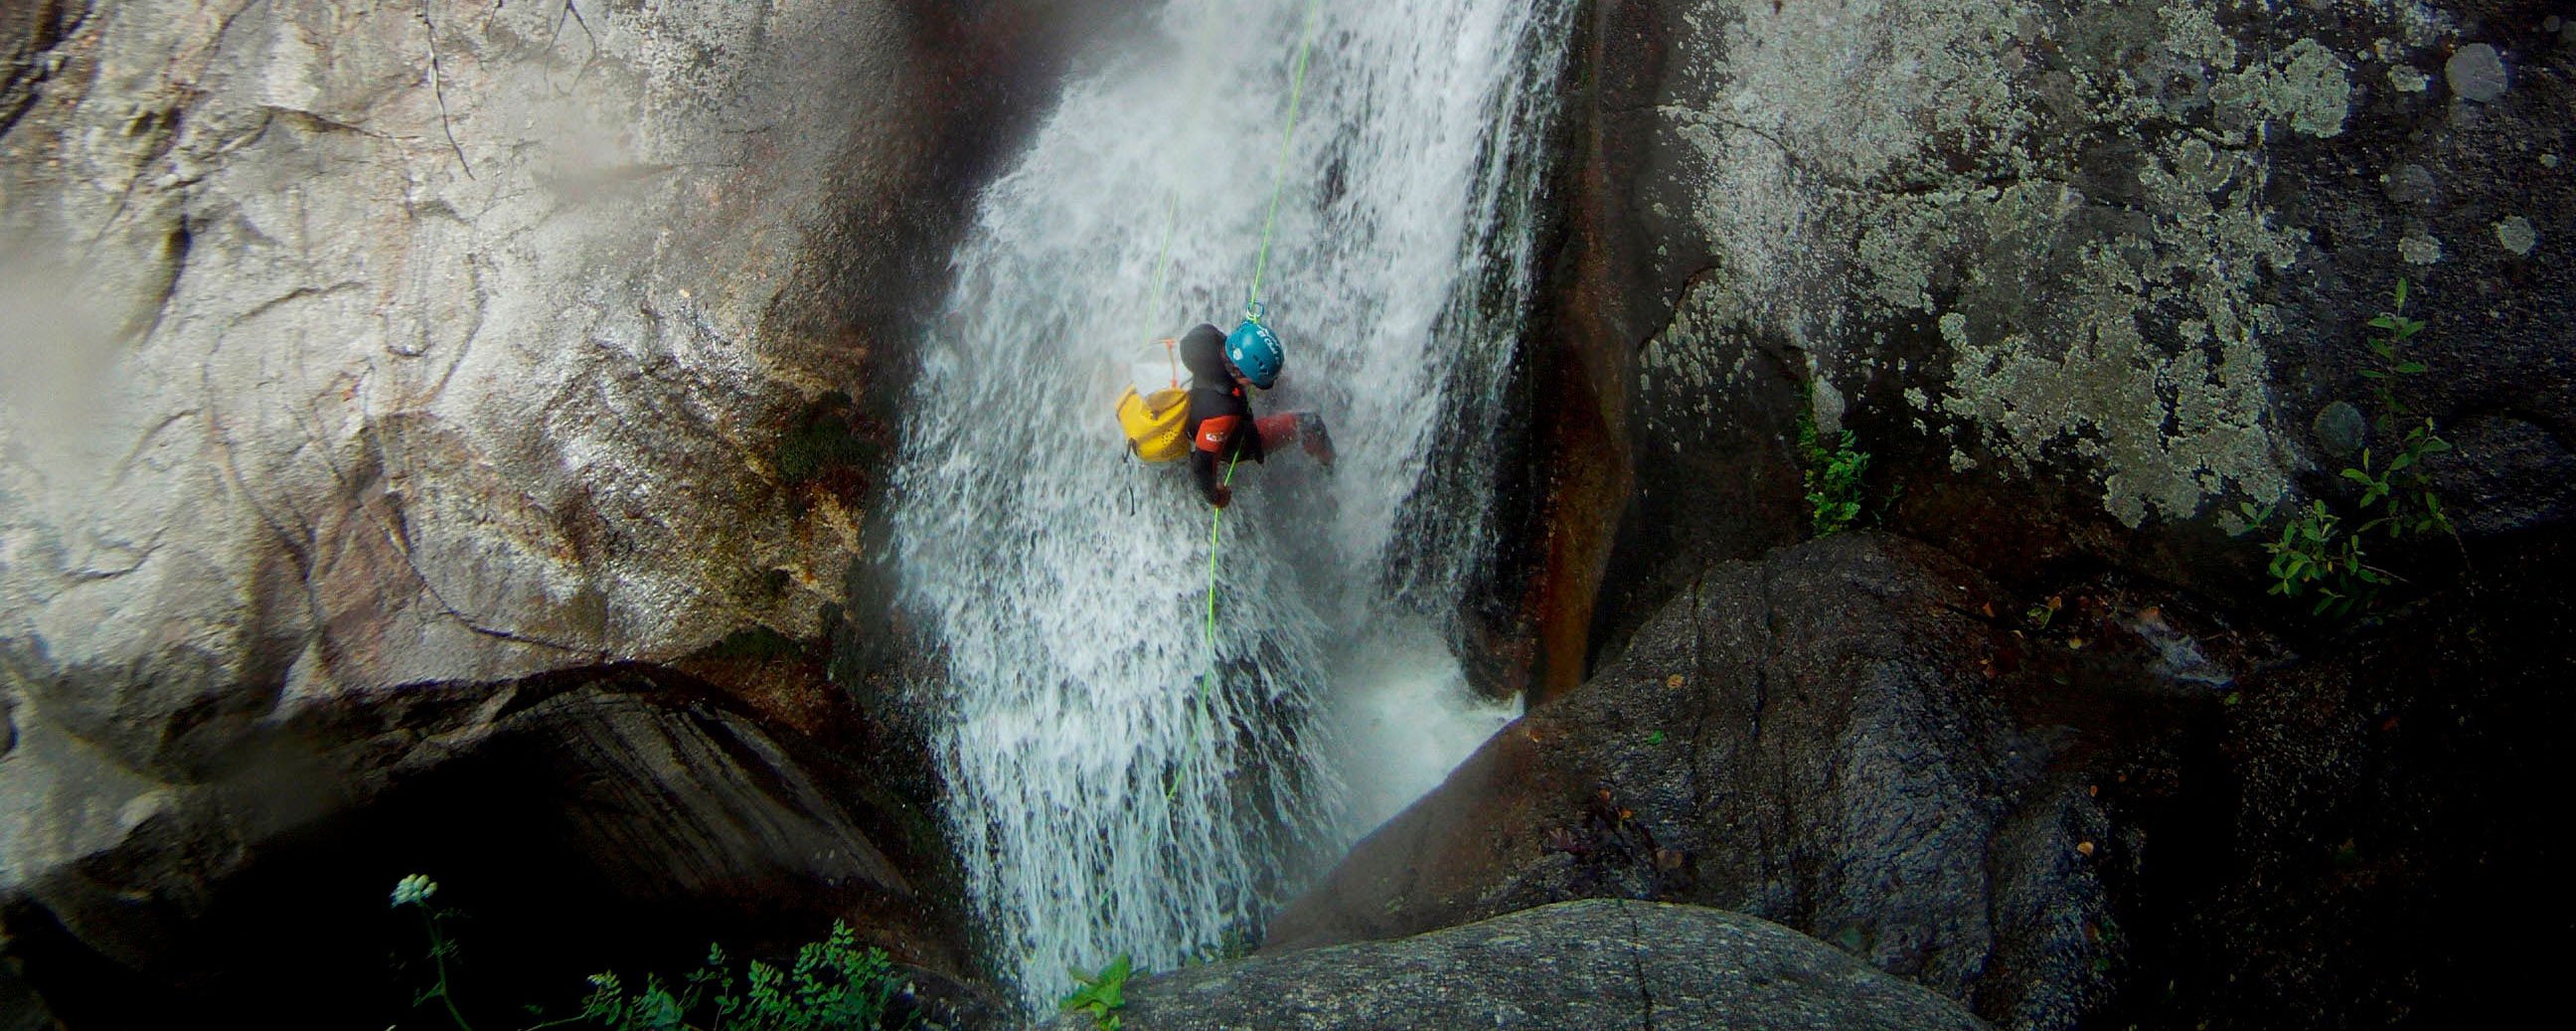 Canyoning courses